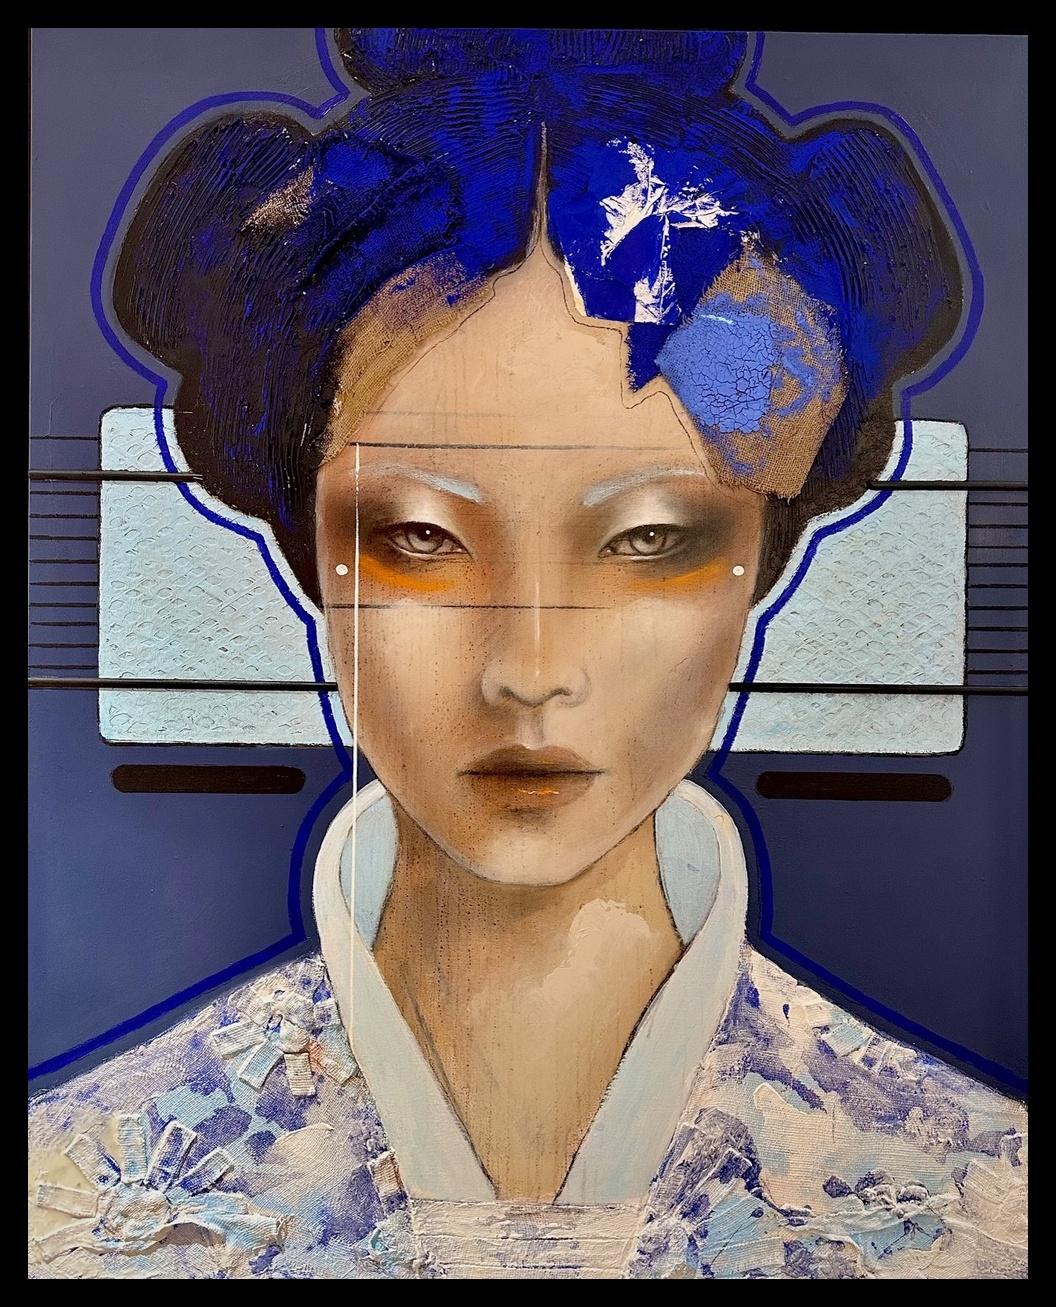 "Sakura", refers to the naive, the genuine. The cherry blossoms in Japan. 
This artwork is part of Ger Doornink's latest show 'Thoughts', where his mastery in portrait painting is reflected and makes evident his role as a craftsman who embraces new